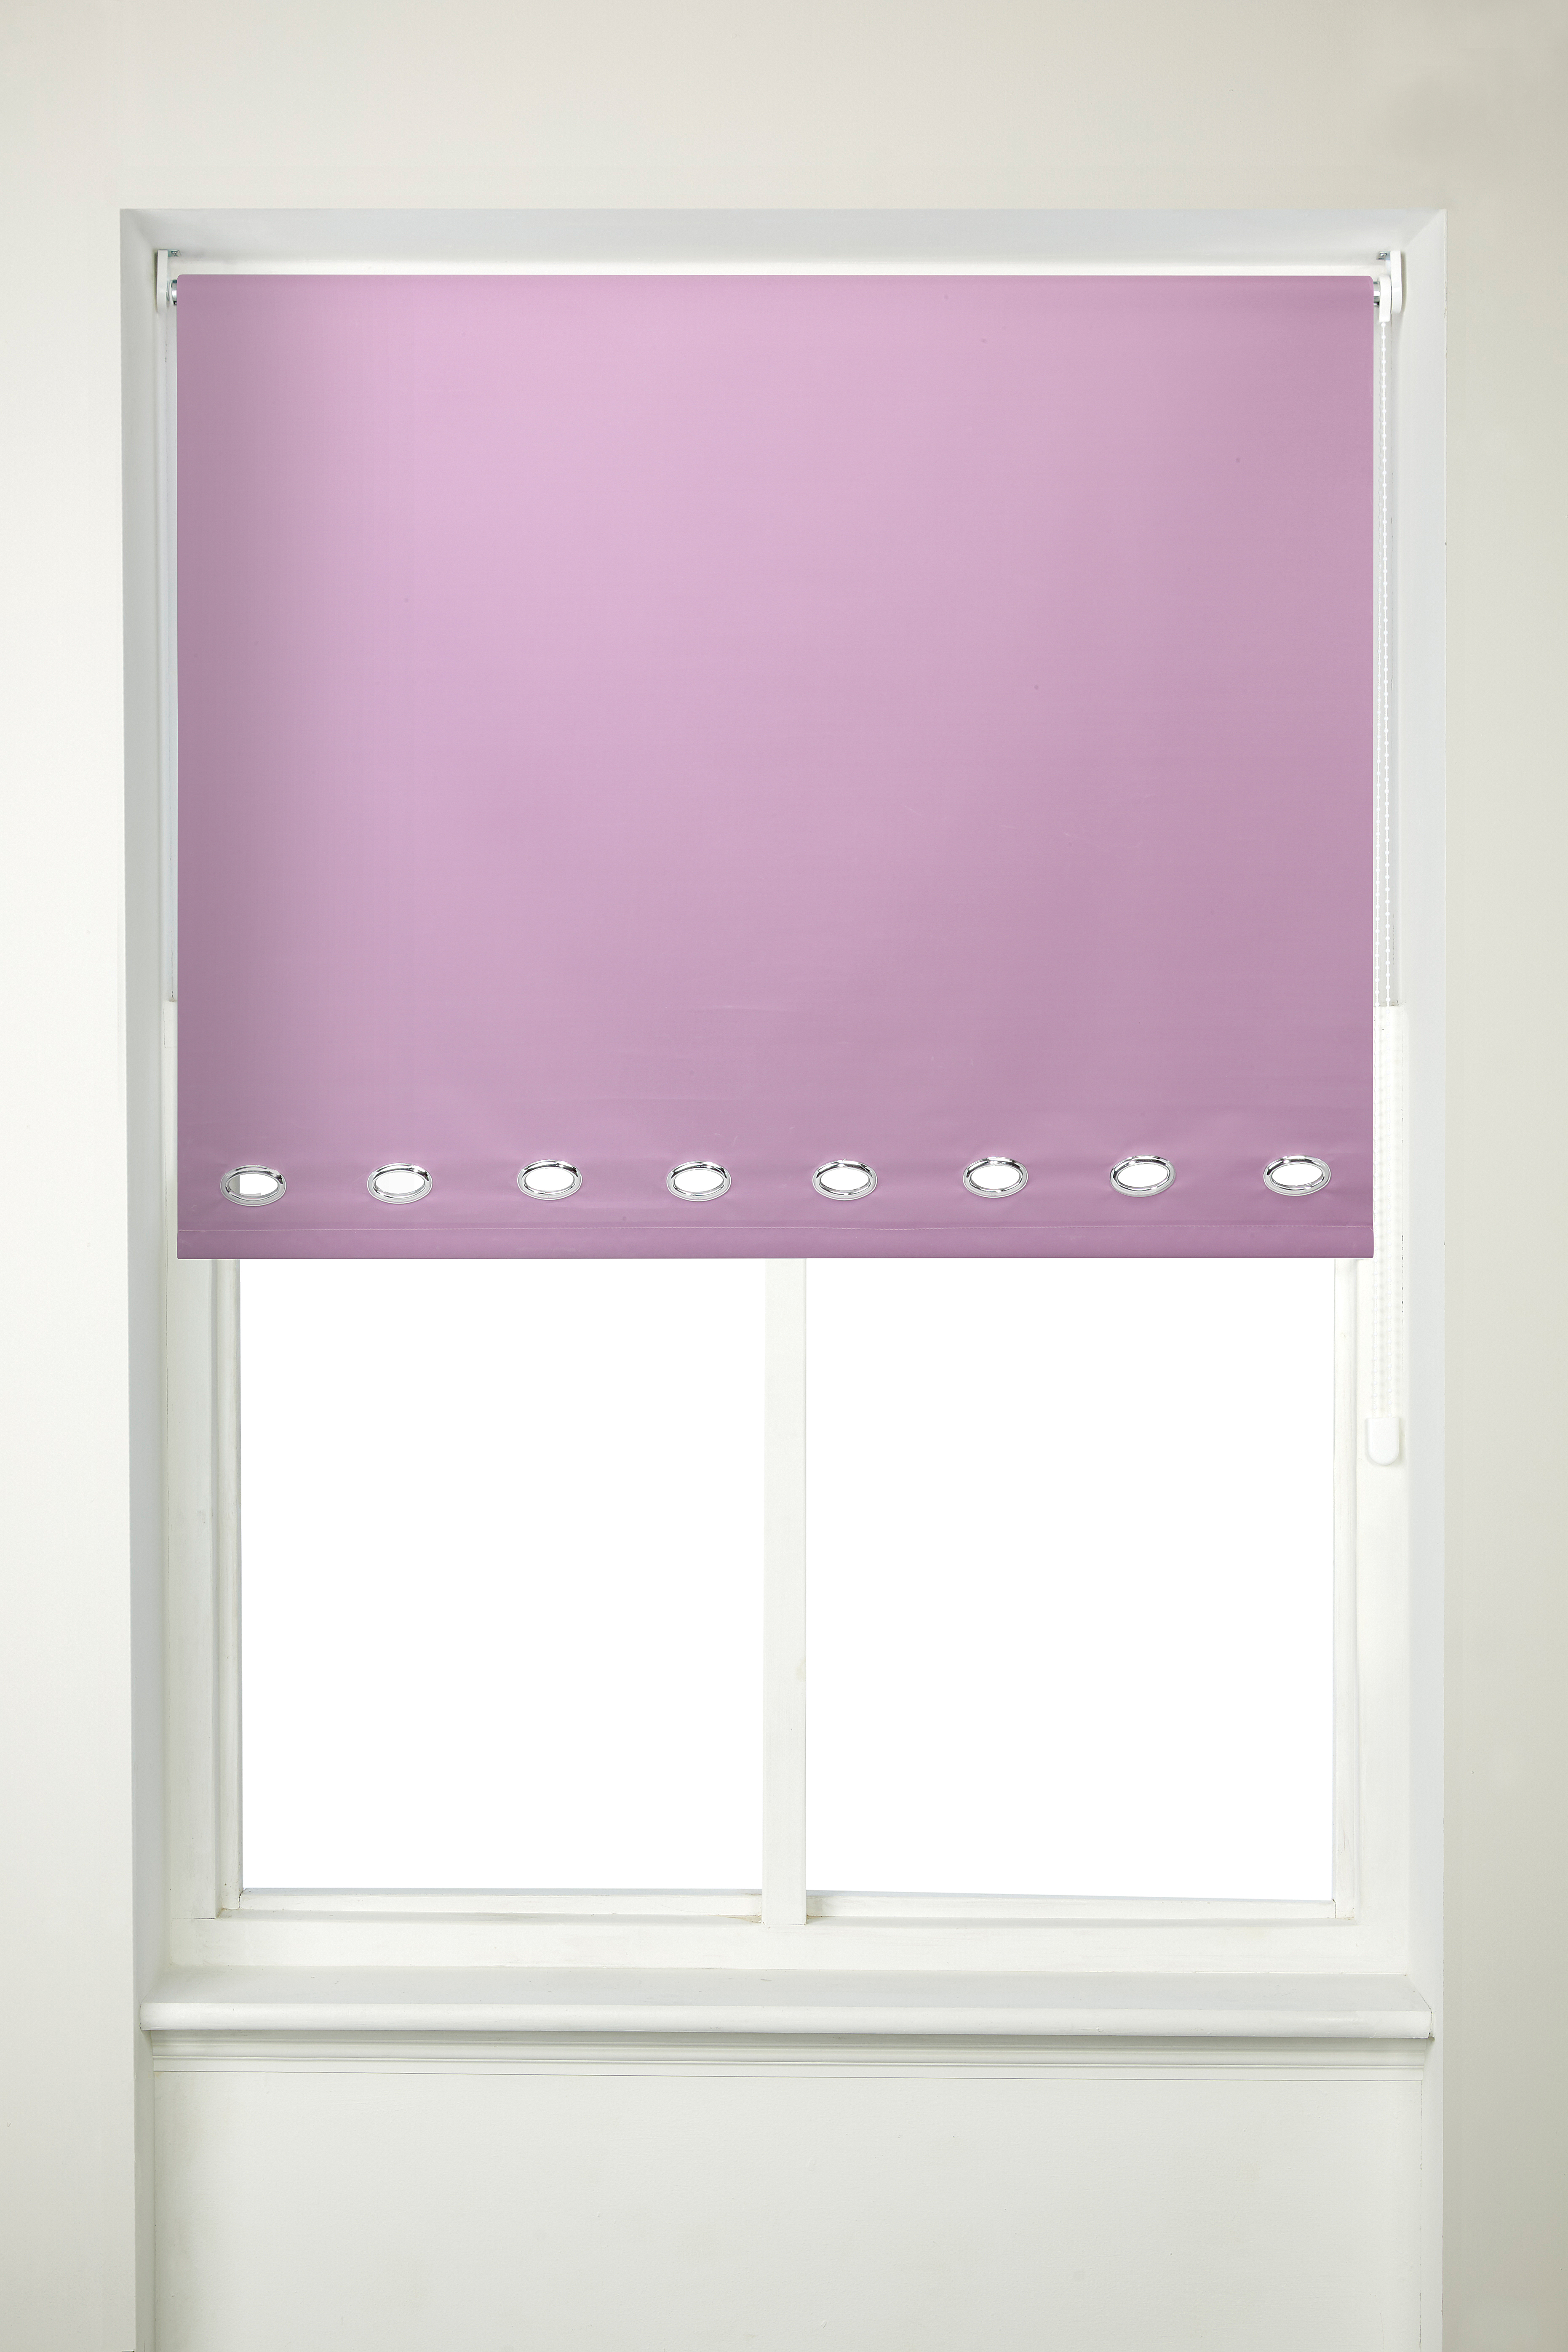 Details about   EASY FIT CHROME SQUARE EYELET TRIMABLE ROLLER BLINDS DROP 160 cm 210 cm 